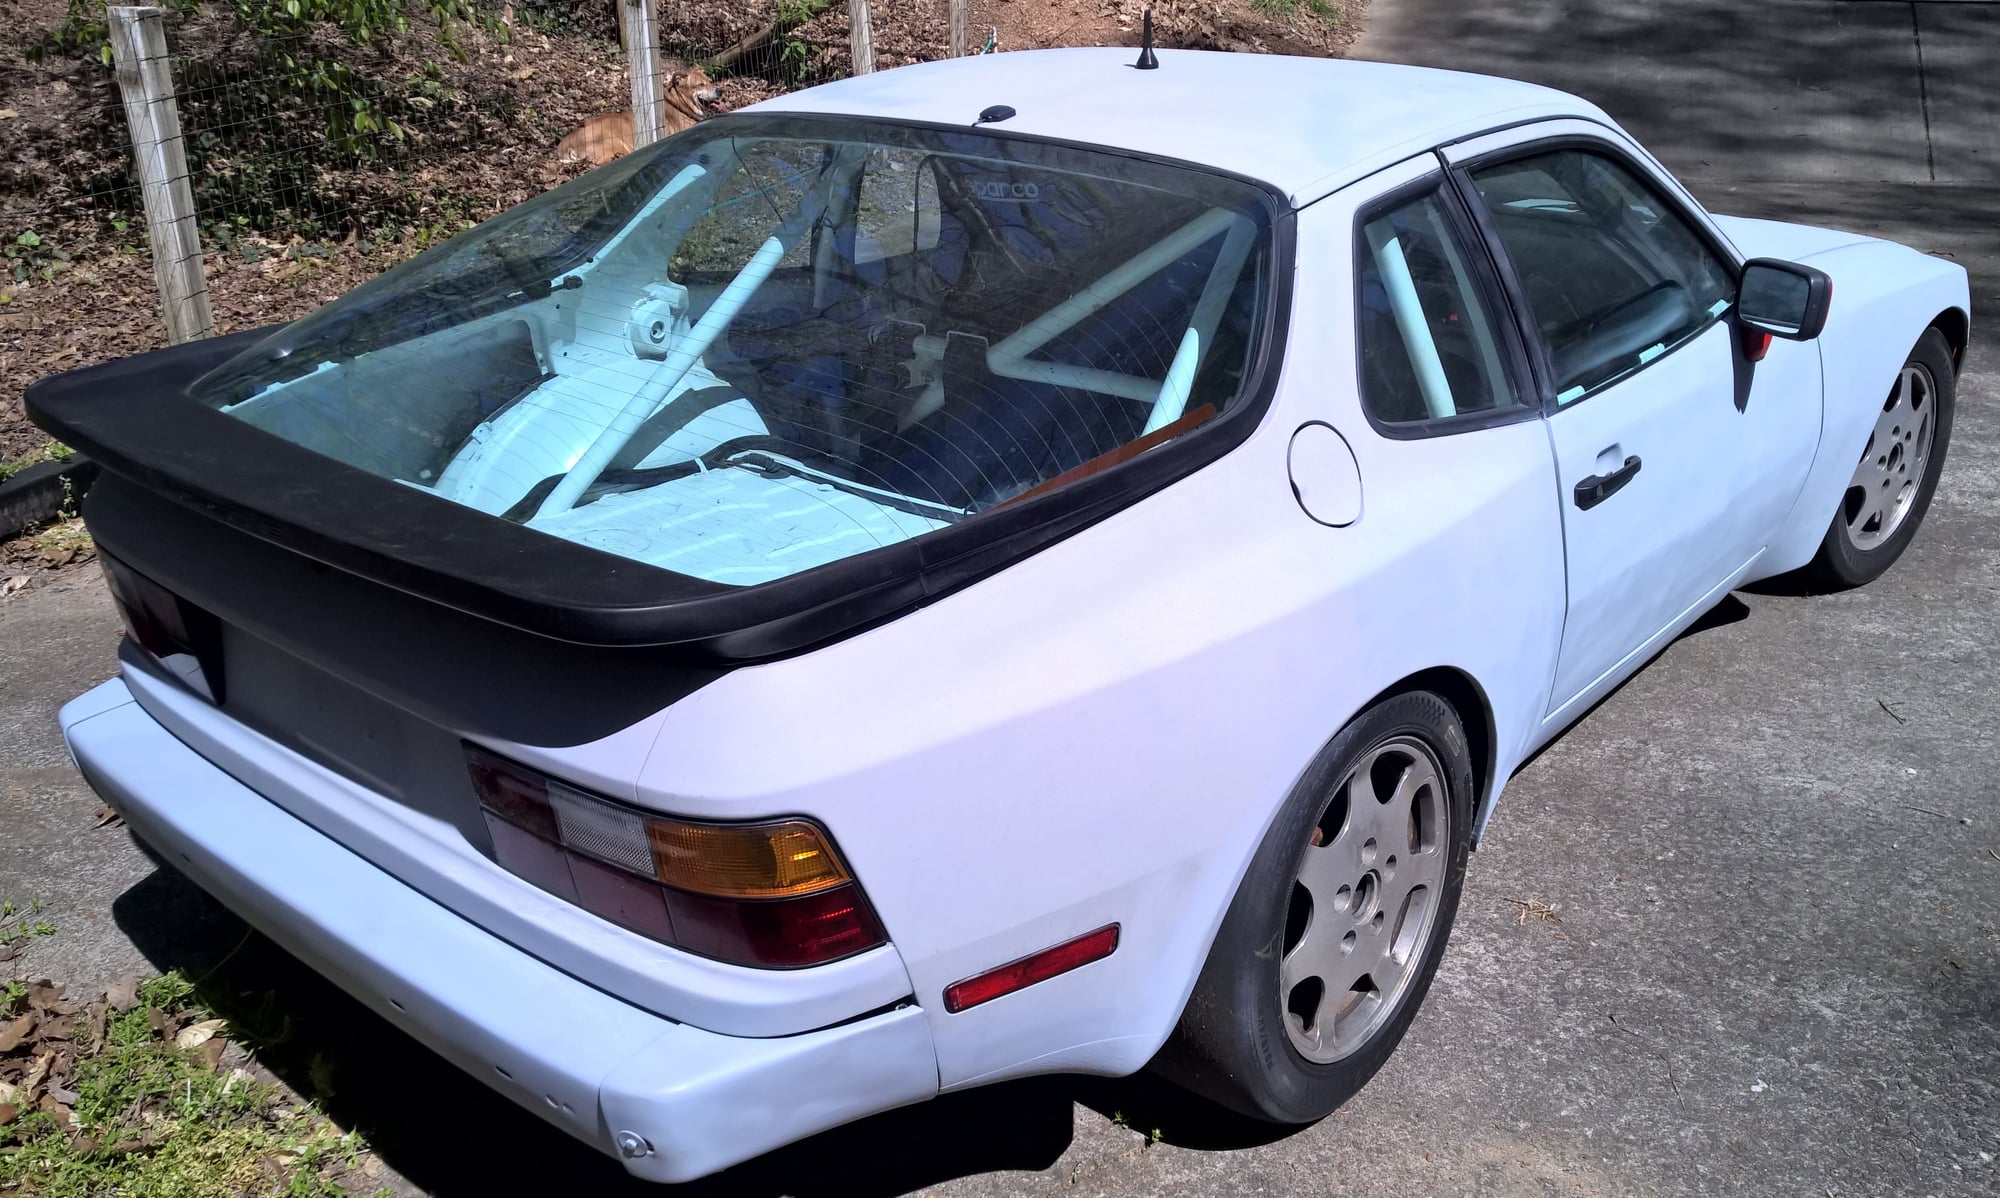 1987 Porsche 944 - Porsche 944 Race Car - Used - VIN WP0AB0942HN477516 - 4 cyl - 2WD - Manual - Hatchback - Gray - Roswell, GA 30075, United States